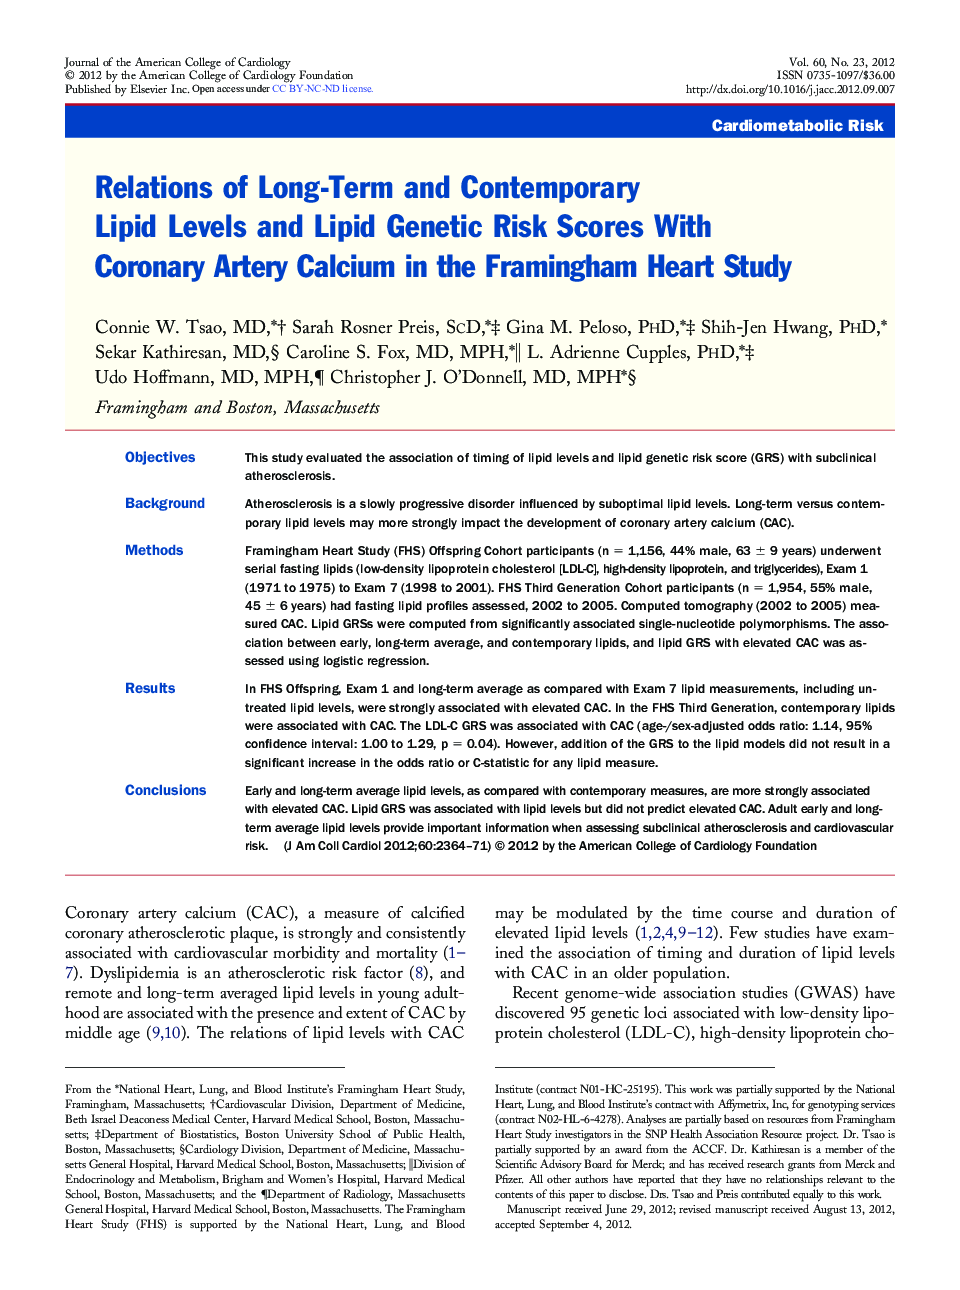 Relations of Long-Term and Contemporary Lipid Levels and Lipid Genetic Risk Scores With Coronary Artery Calcium in the Framingham Heart Study